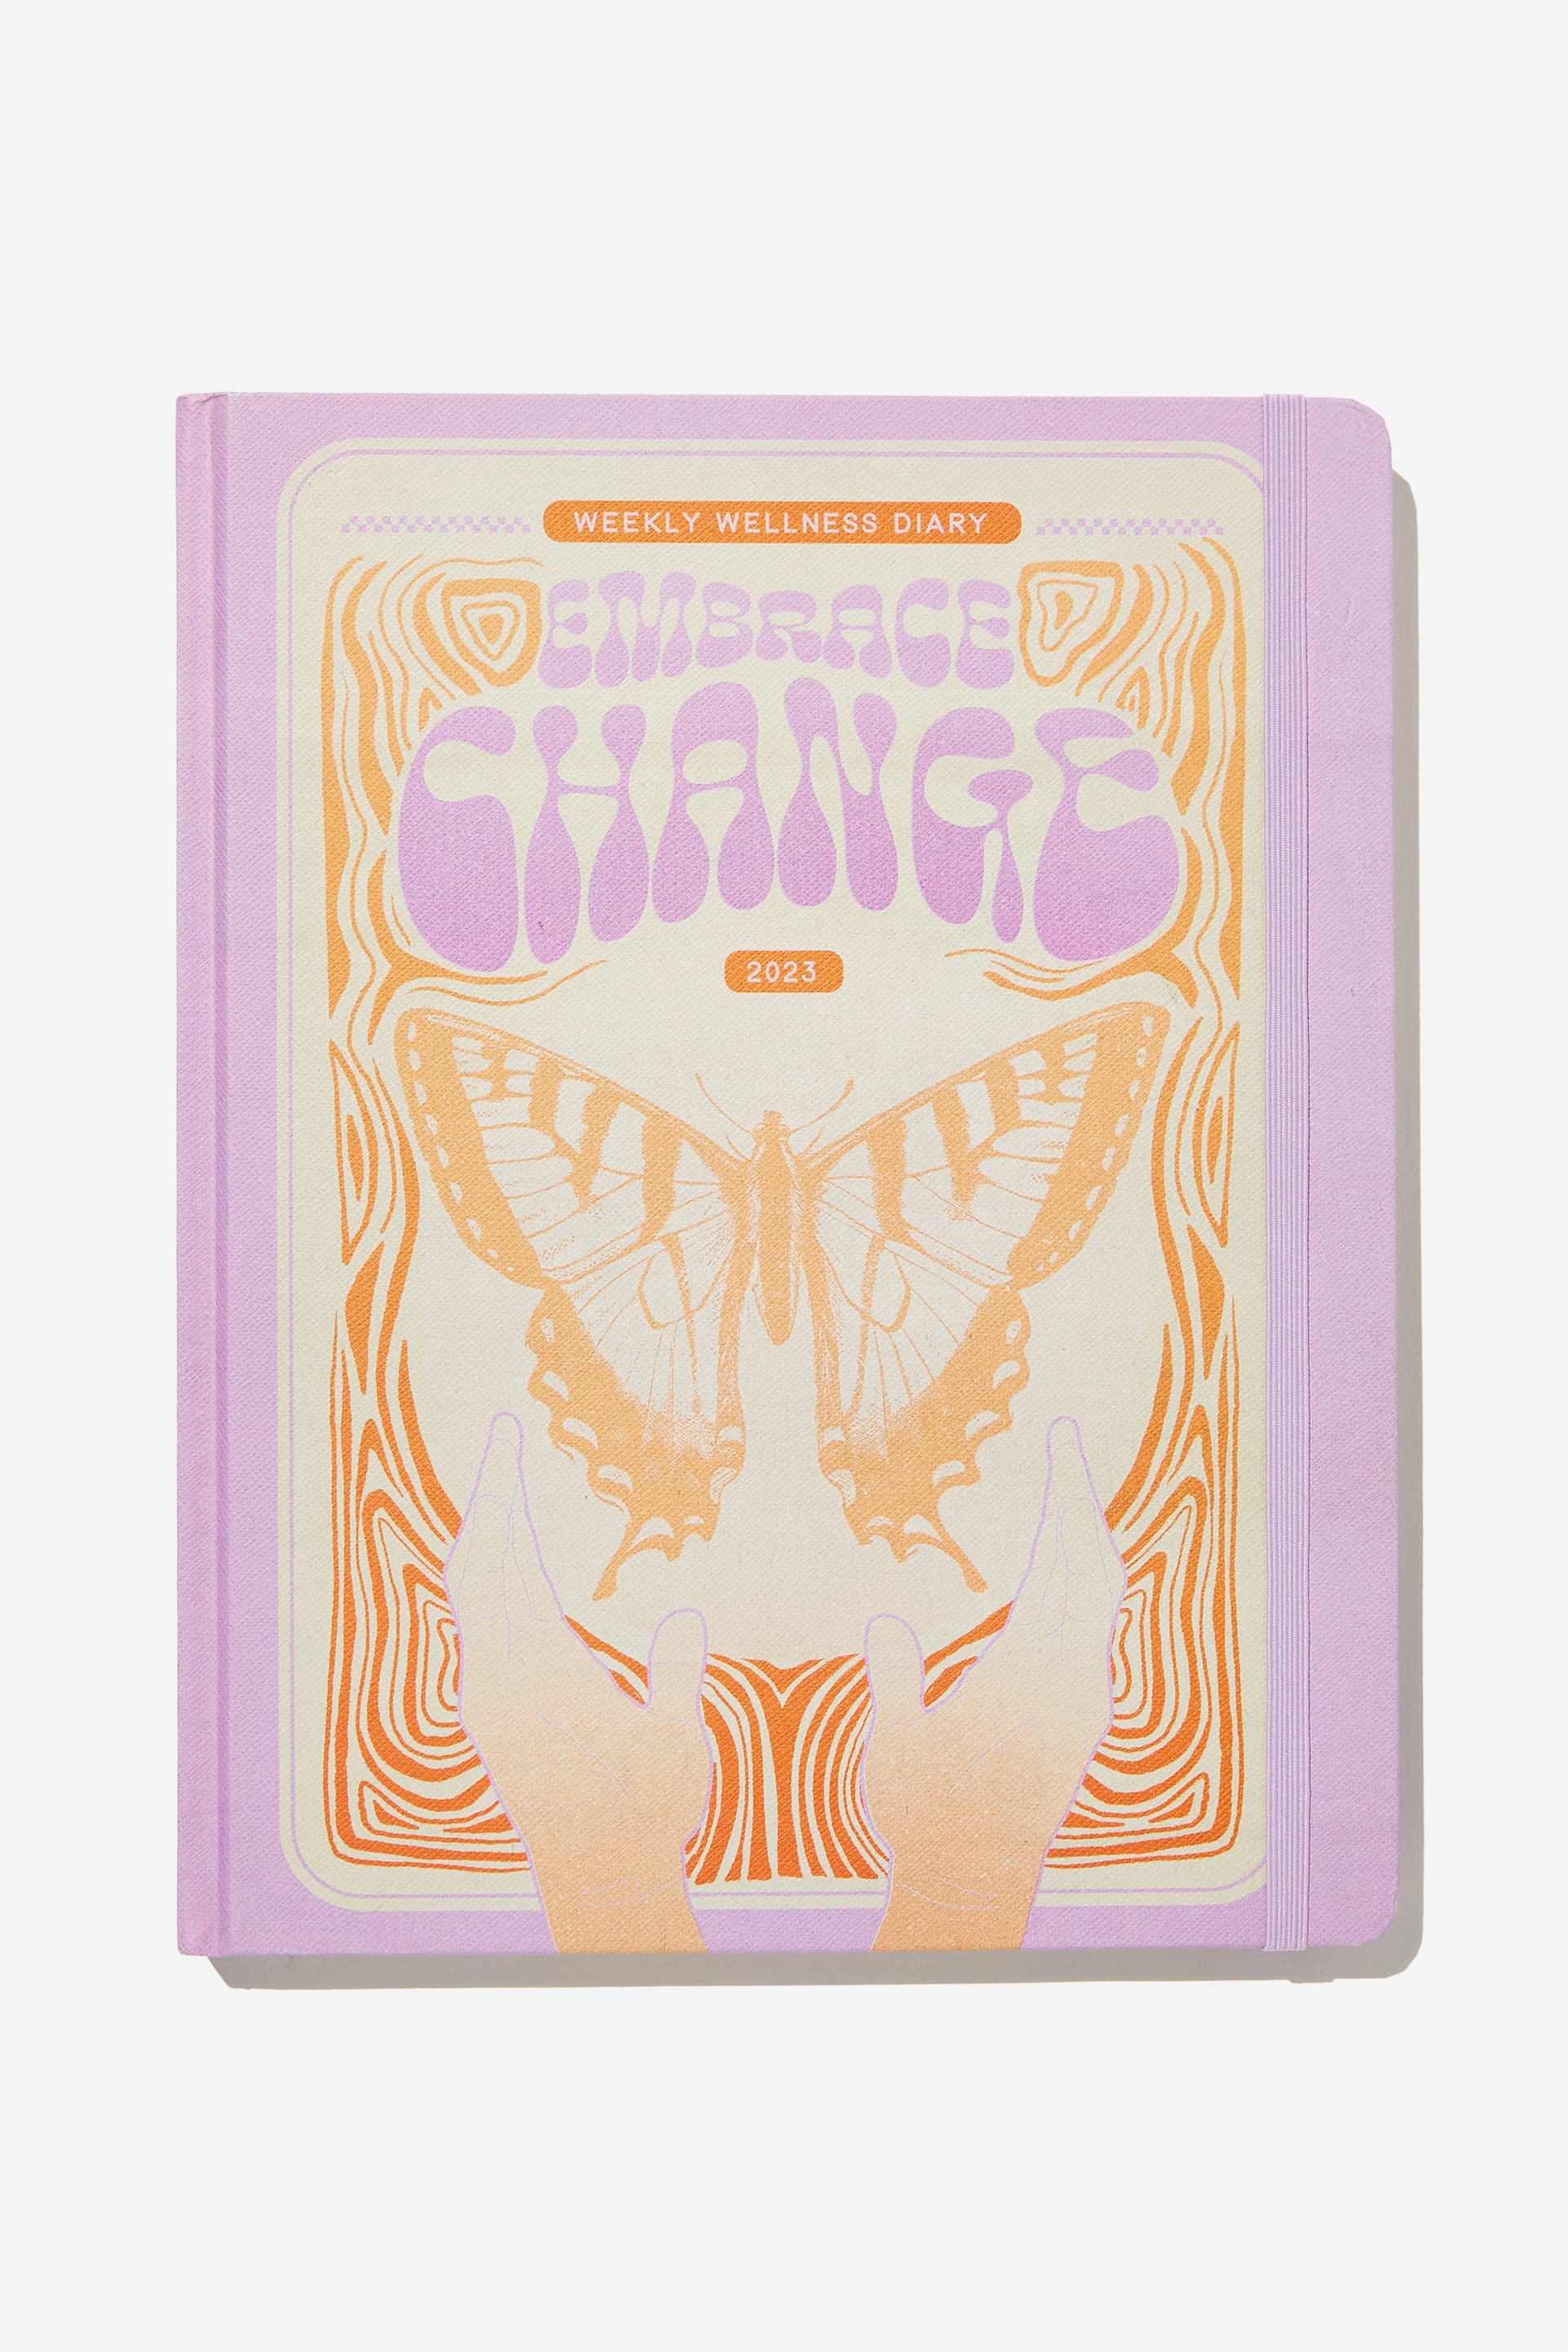 Typo - 2023 Large Weekly Wellness Diary - Embrace change orange butterfly